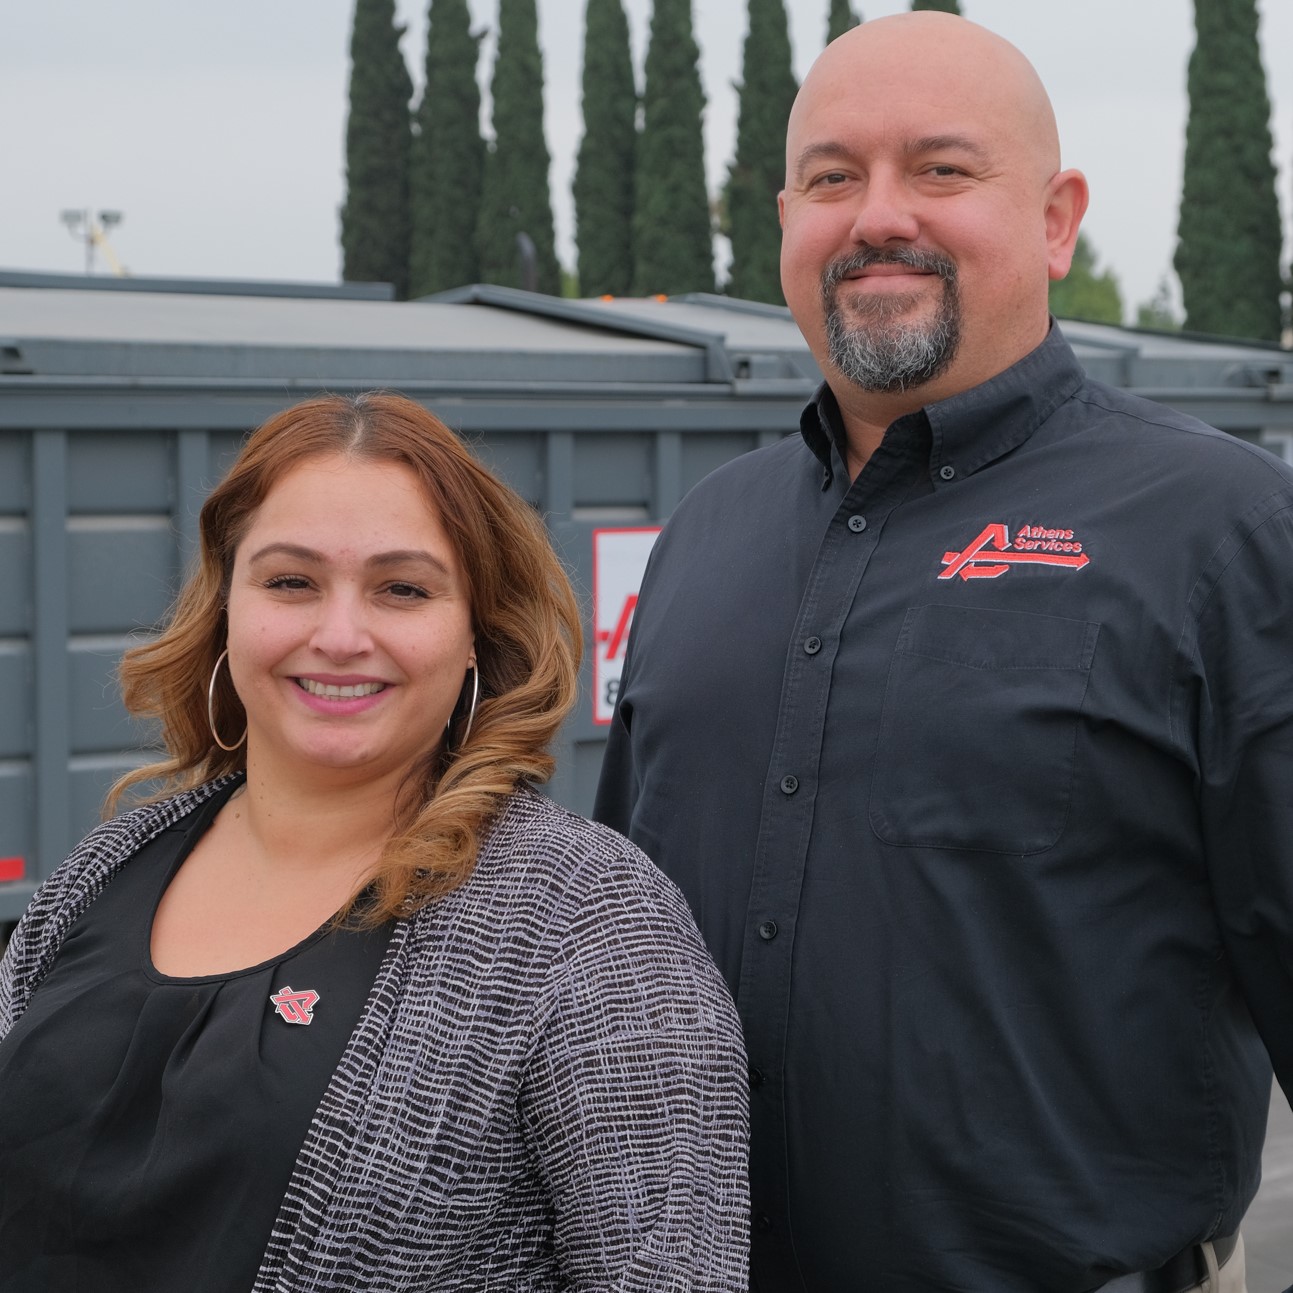 11Special Waste Roll-Off Coordinator Claudia Arellano and Special Waste Manager Jaime Aleman